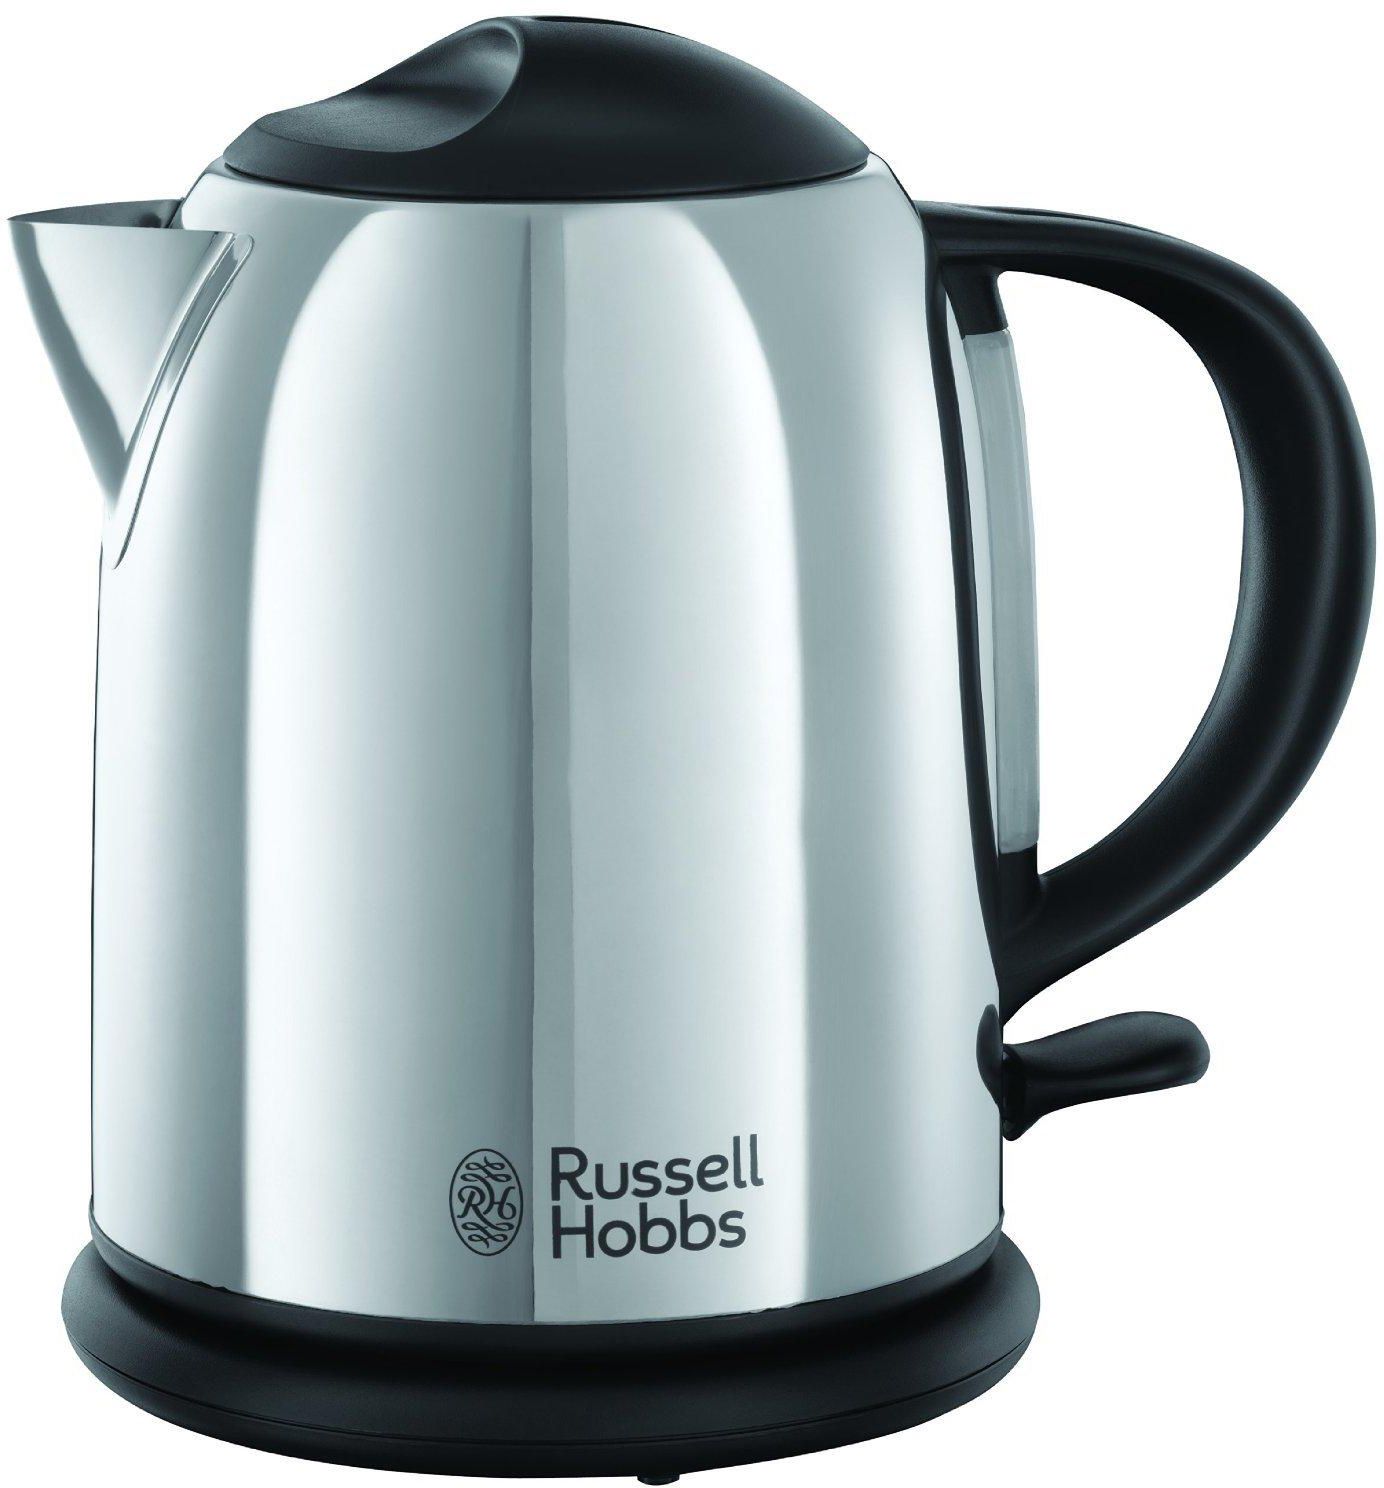 Russell Hobbs 20190 Chester Compact Kettle 1L 2200W - Polished Stainless Steel